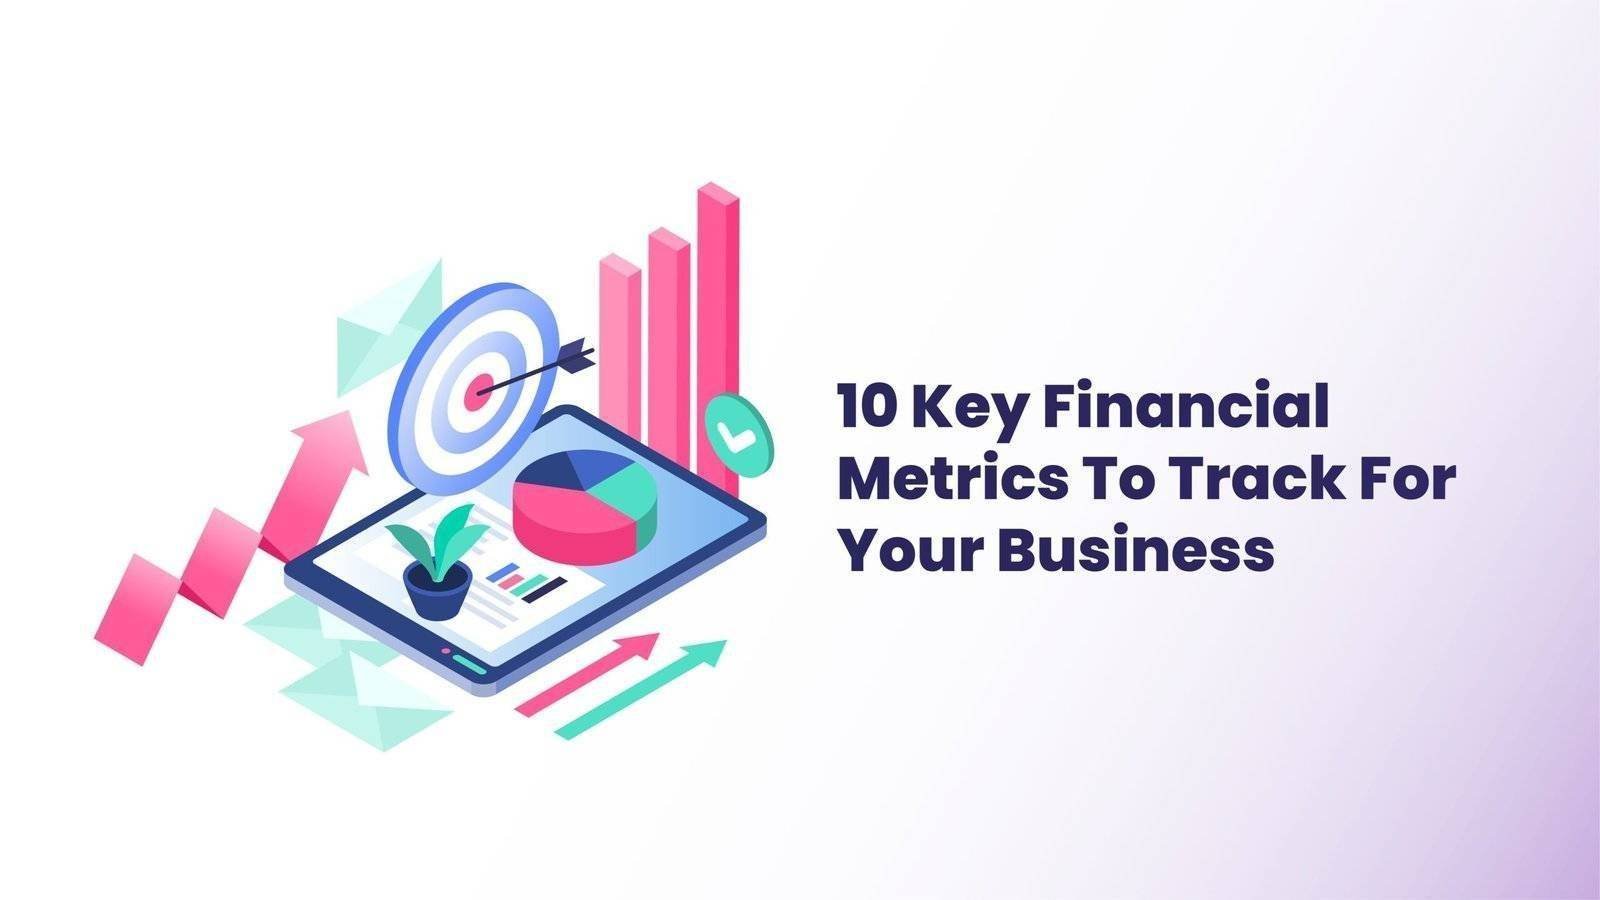 10 Key Financial Metrics To Track For Your Business